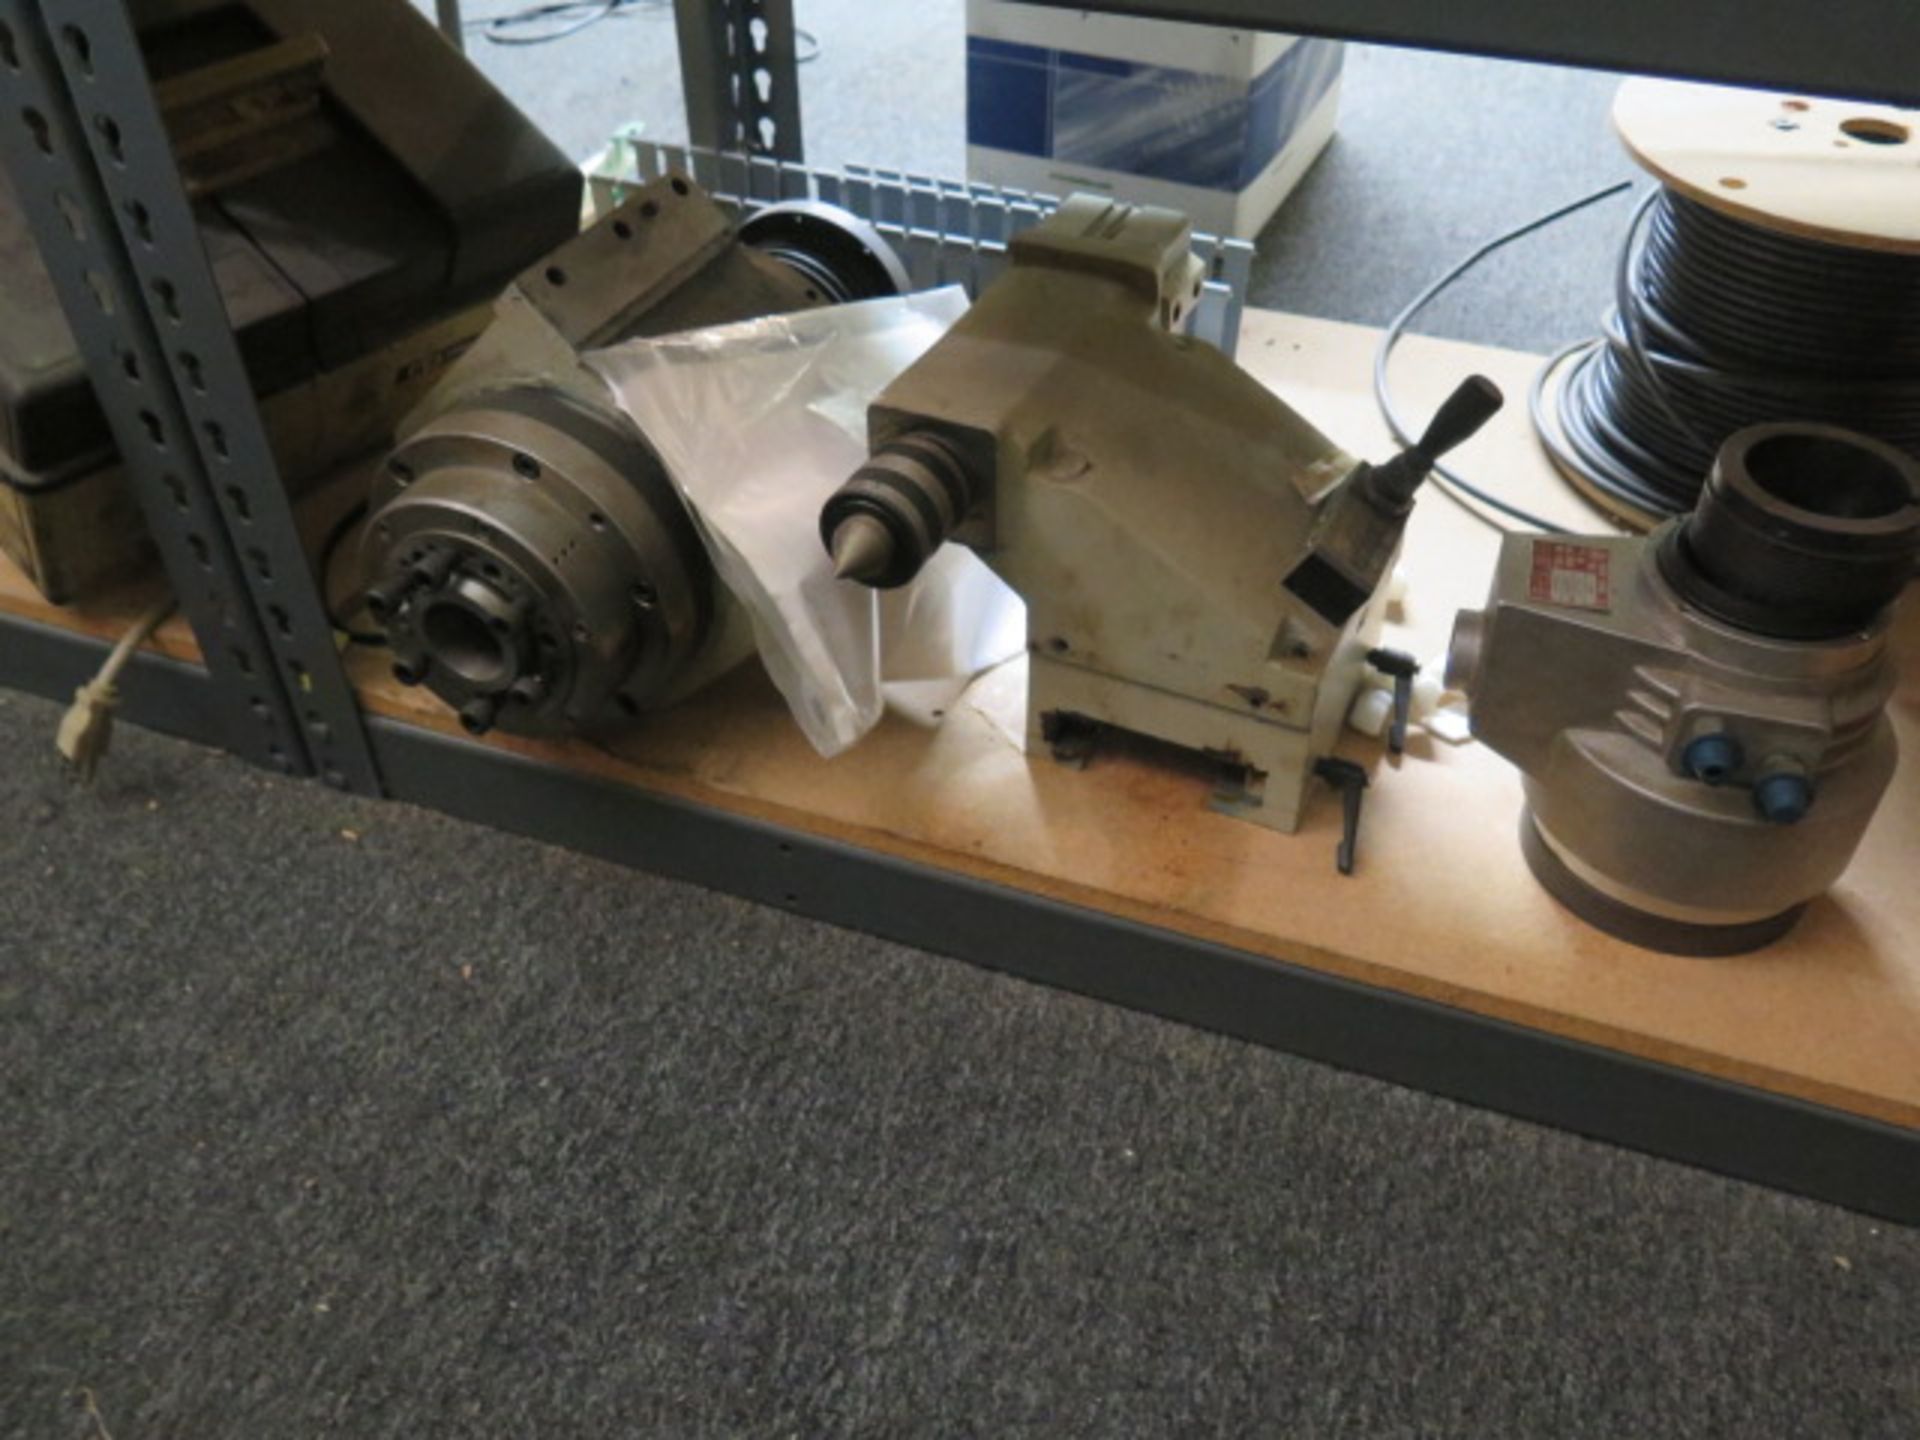 Large Quantity of Machine Replacement Parts Including Spindles, Bearings, Pneumatic Collet - Image 12 of 30